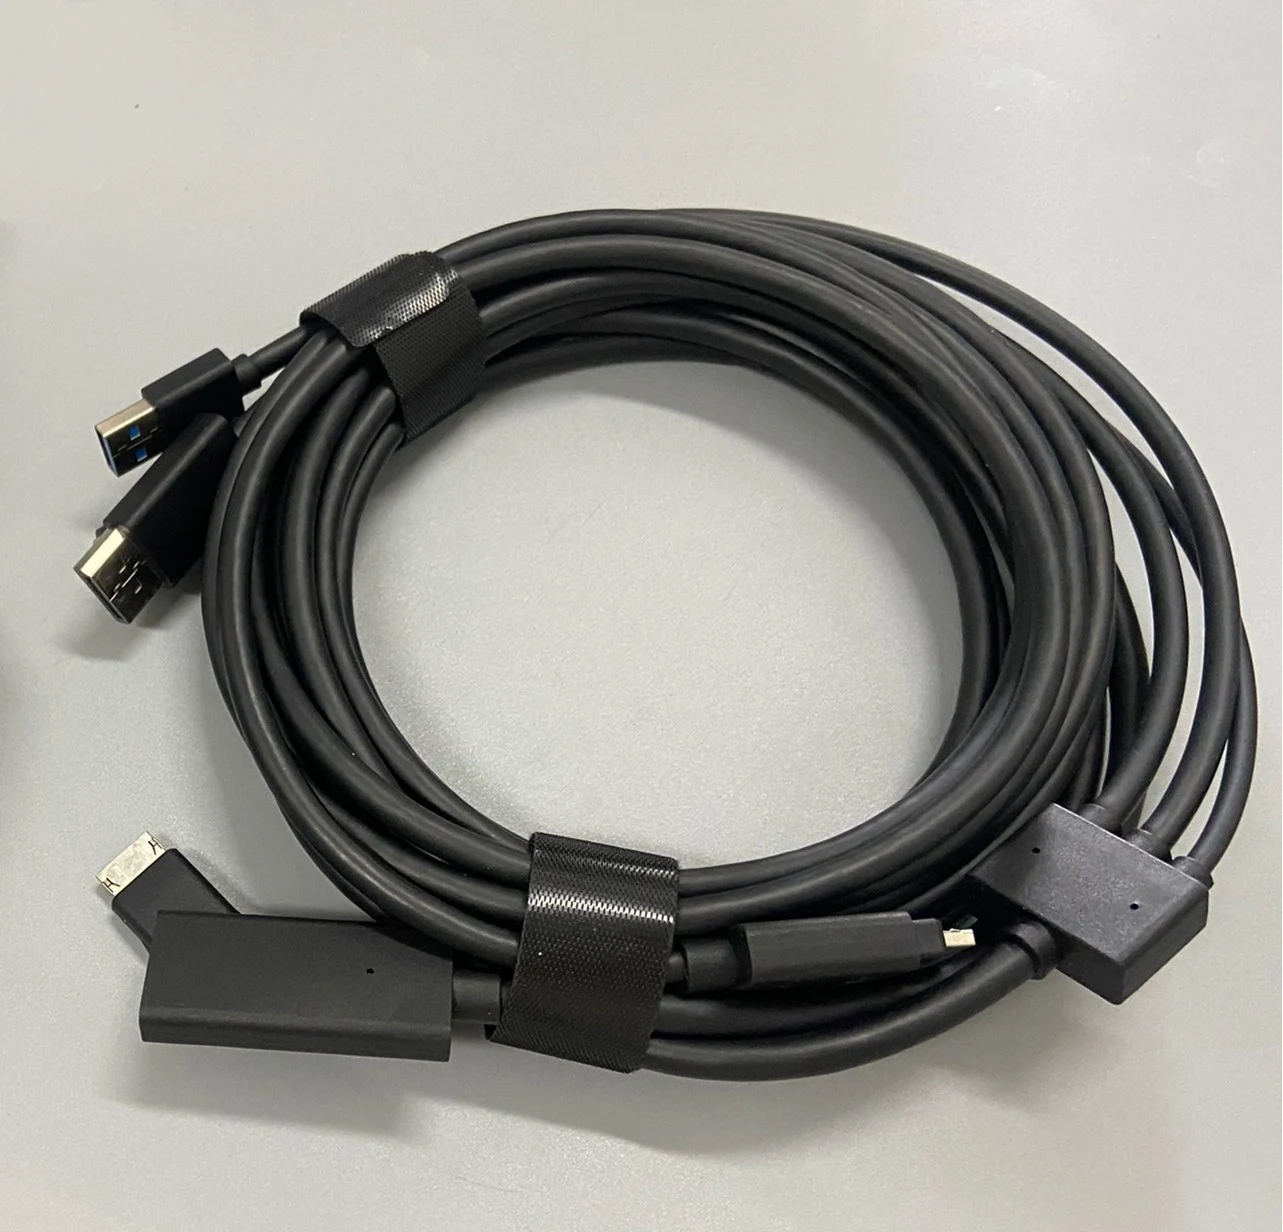 Original For VALVE INDEX VR Headset Cable  + 3 in 1 Connecting Cable Cord 5.9M Virtual Reality PC Games enlarge